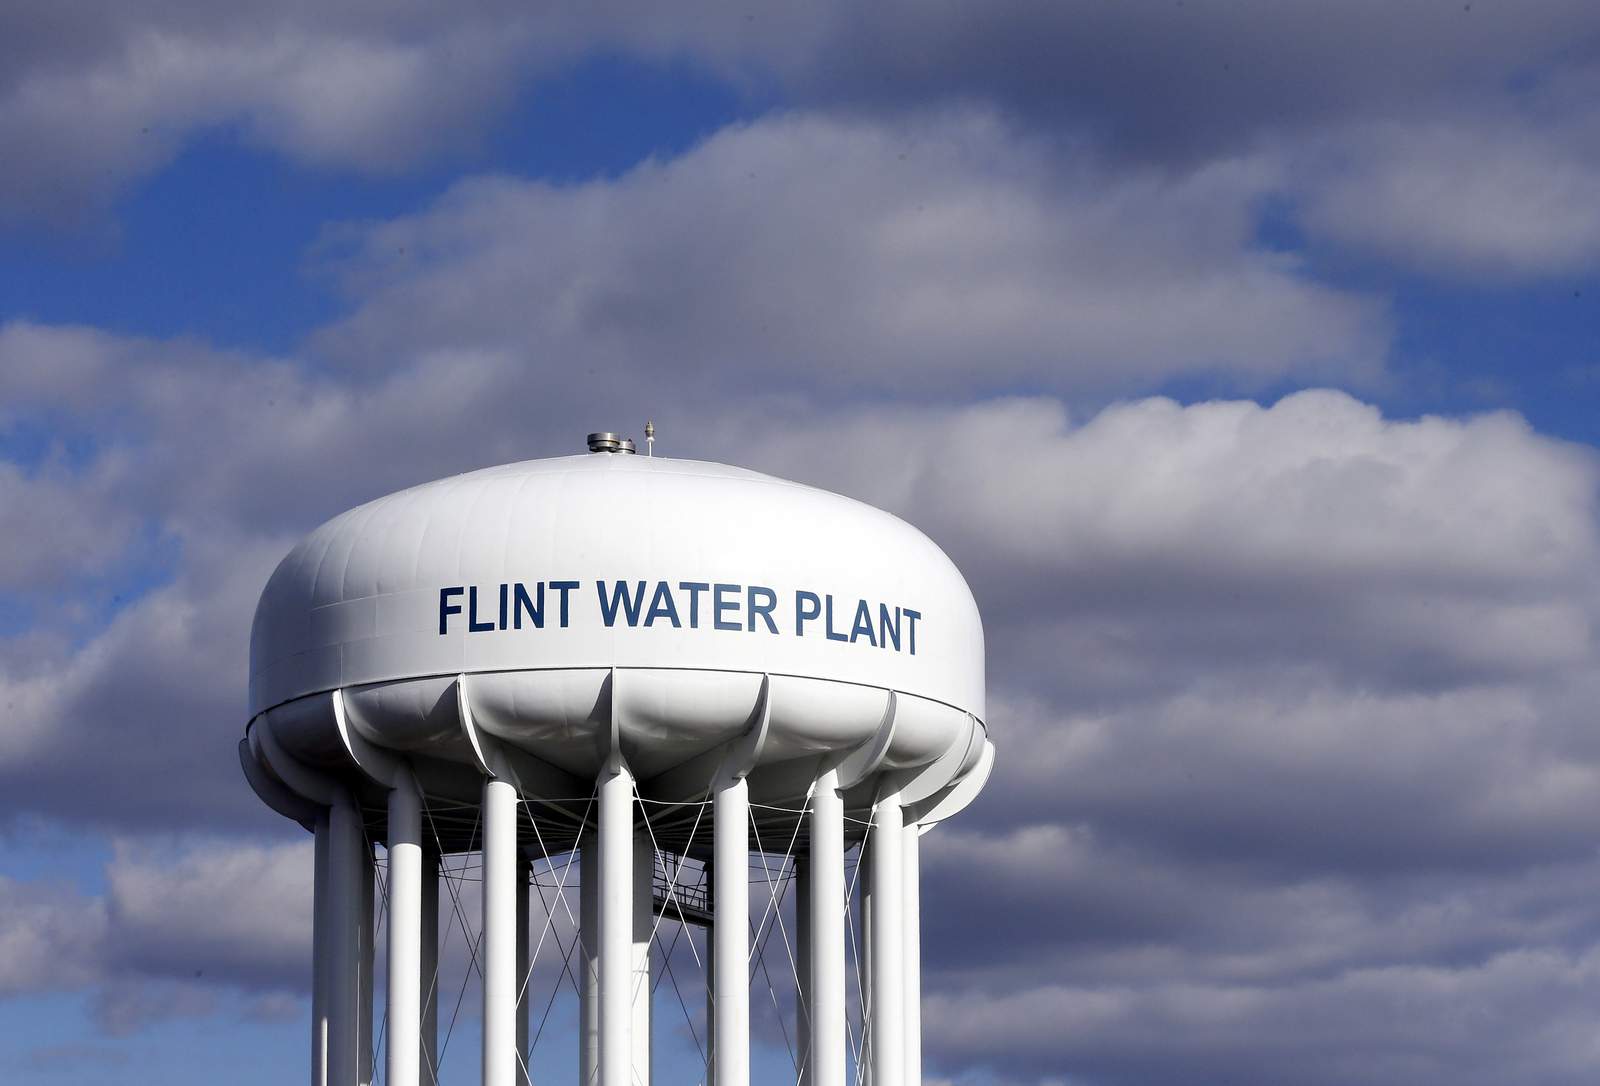 Reports: Michigan reaches $600M deal in Flint water crisis